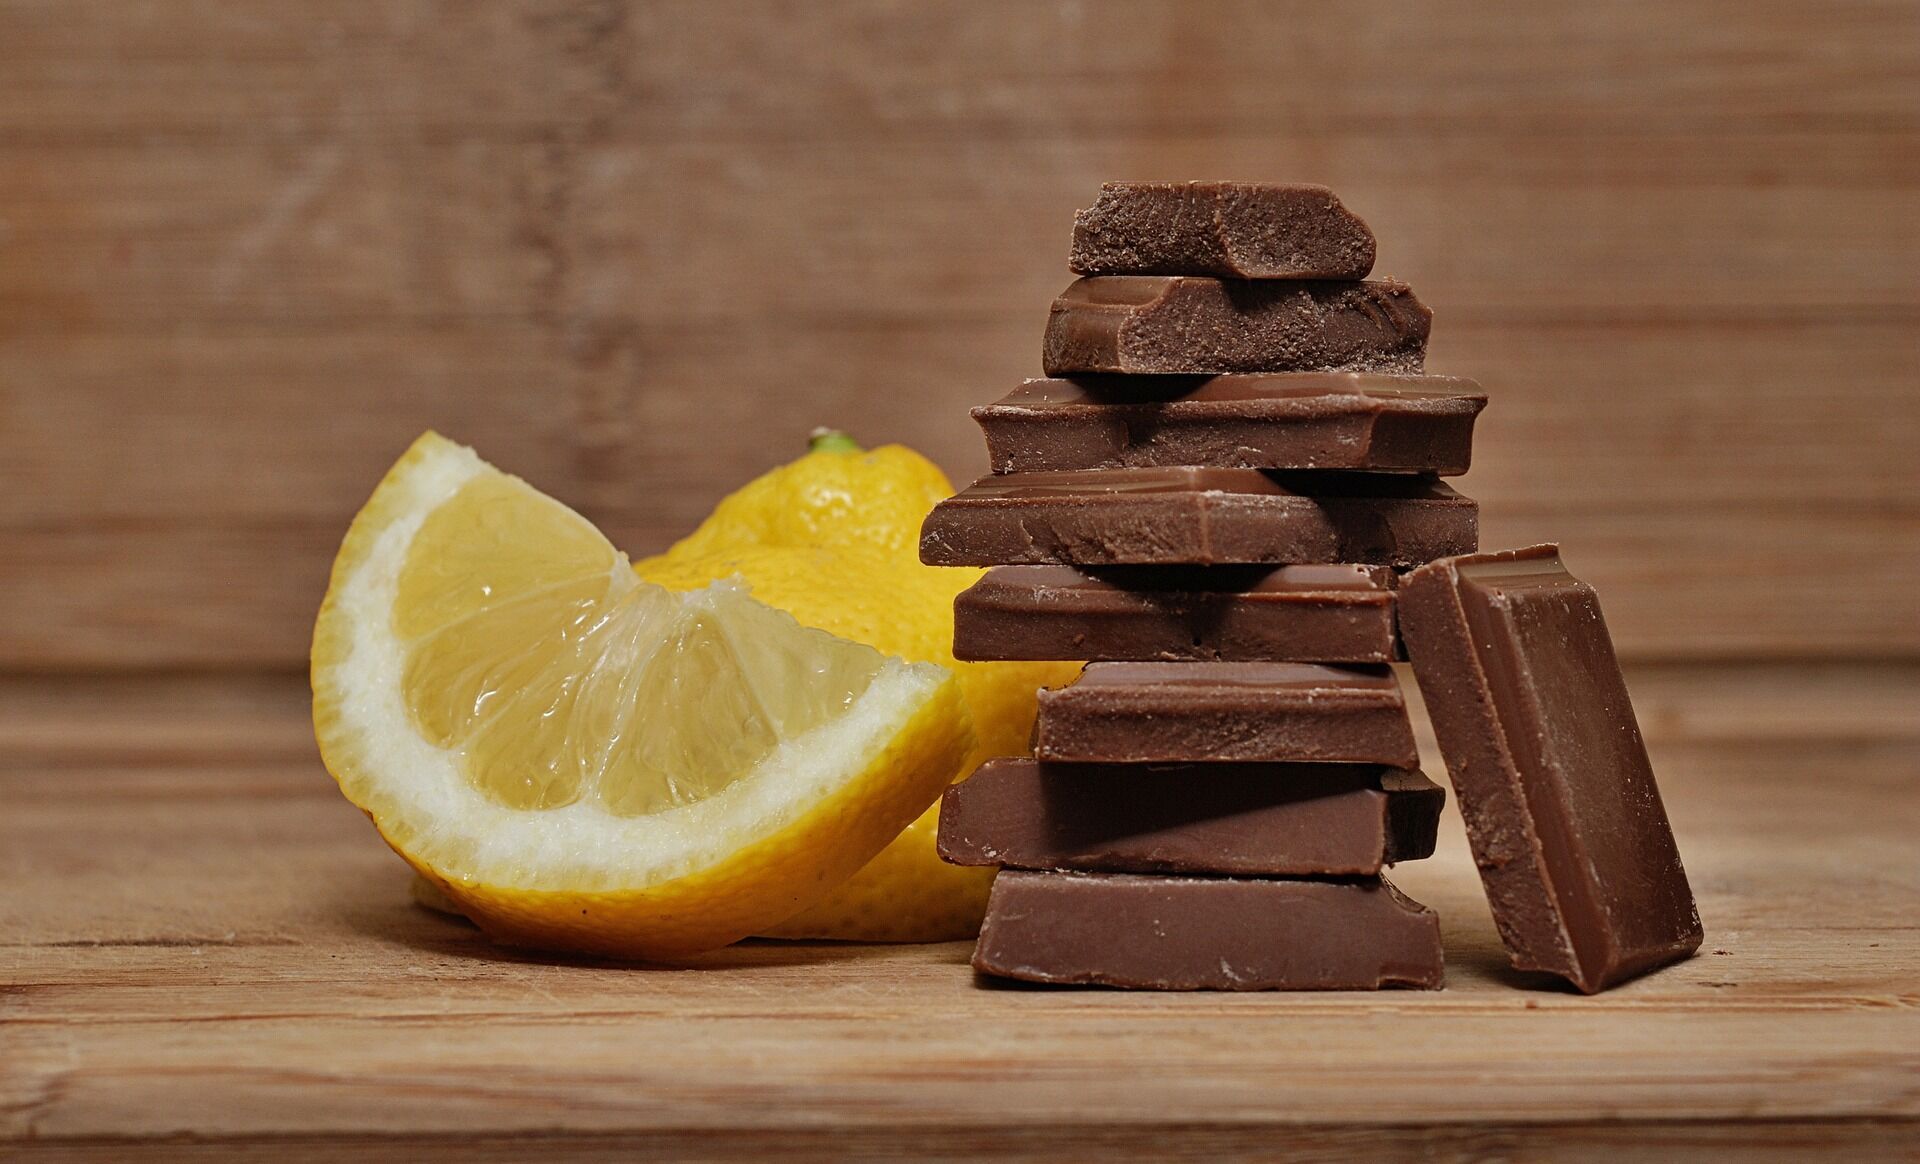 How to choose healthy chocolate